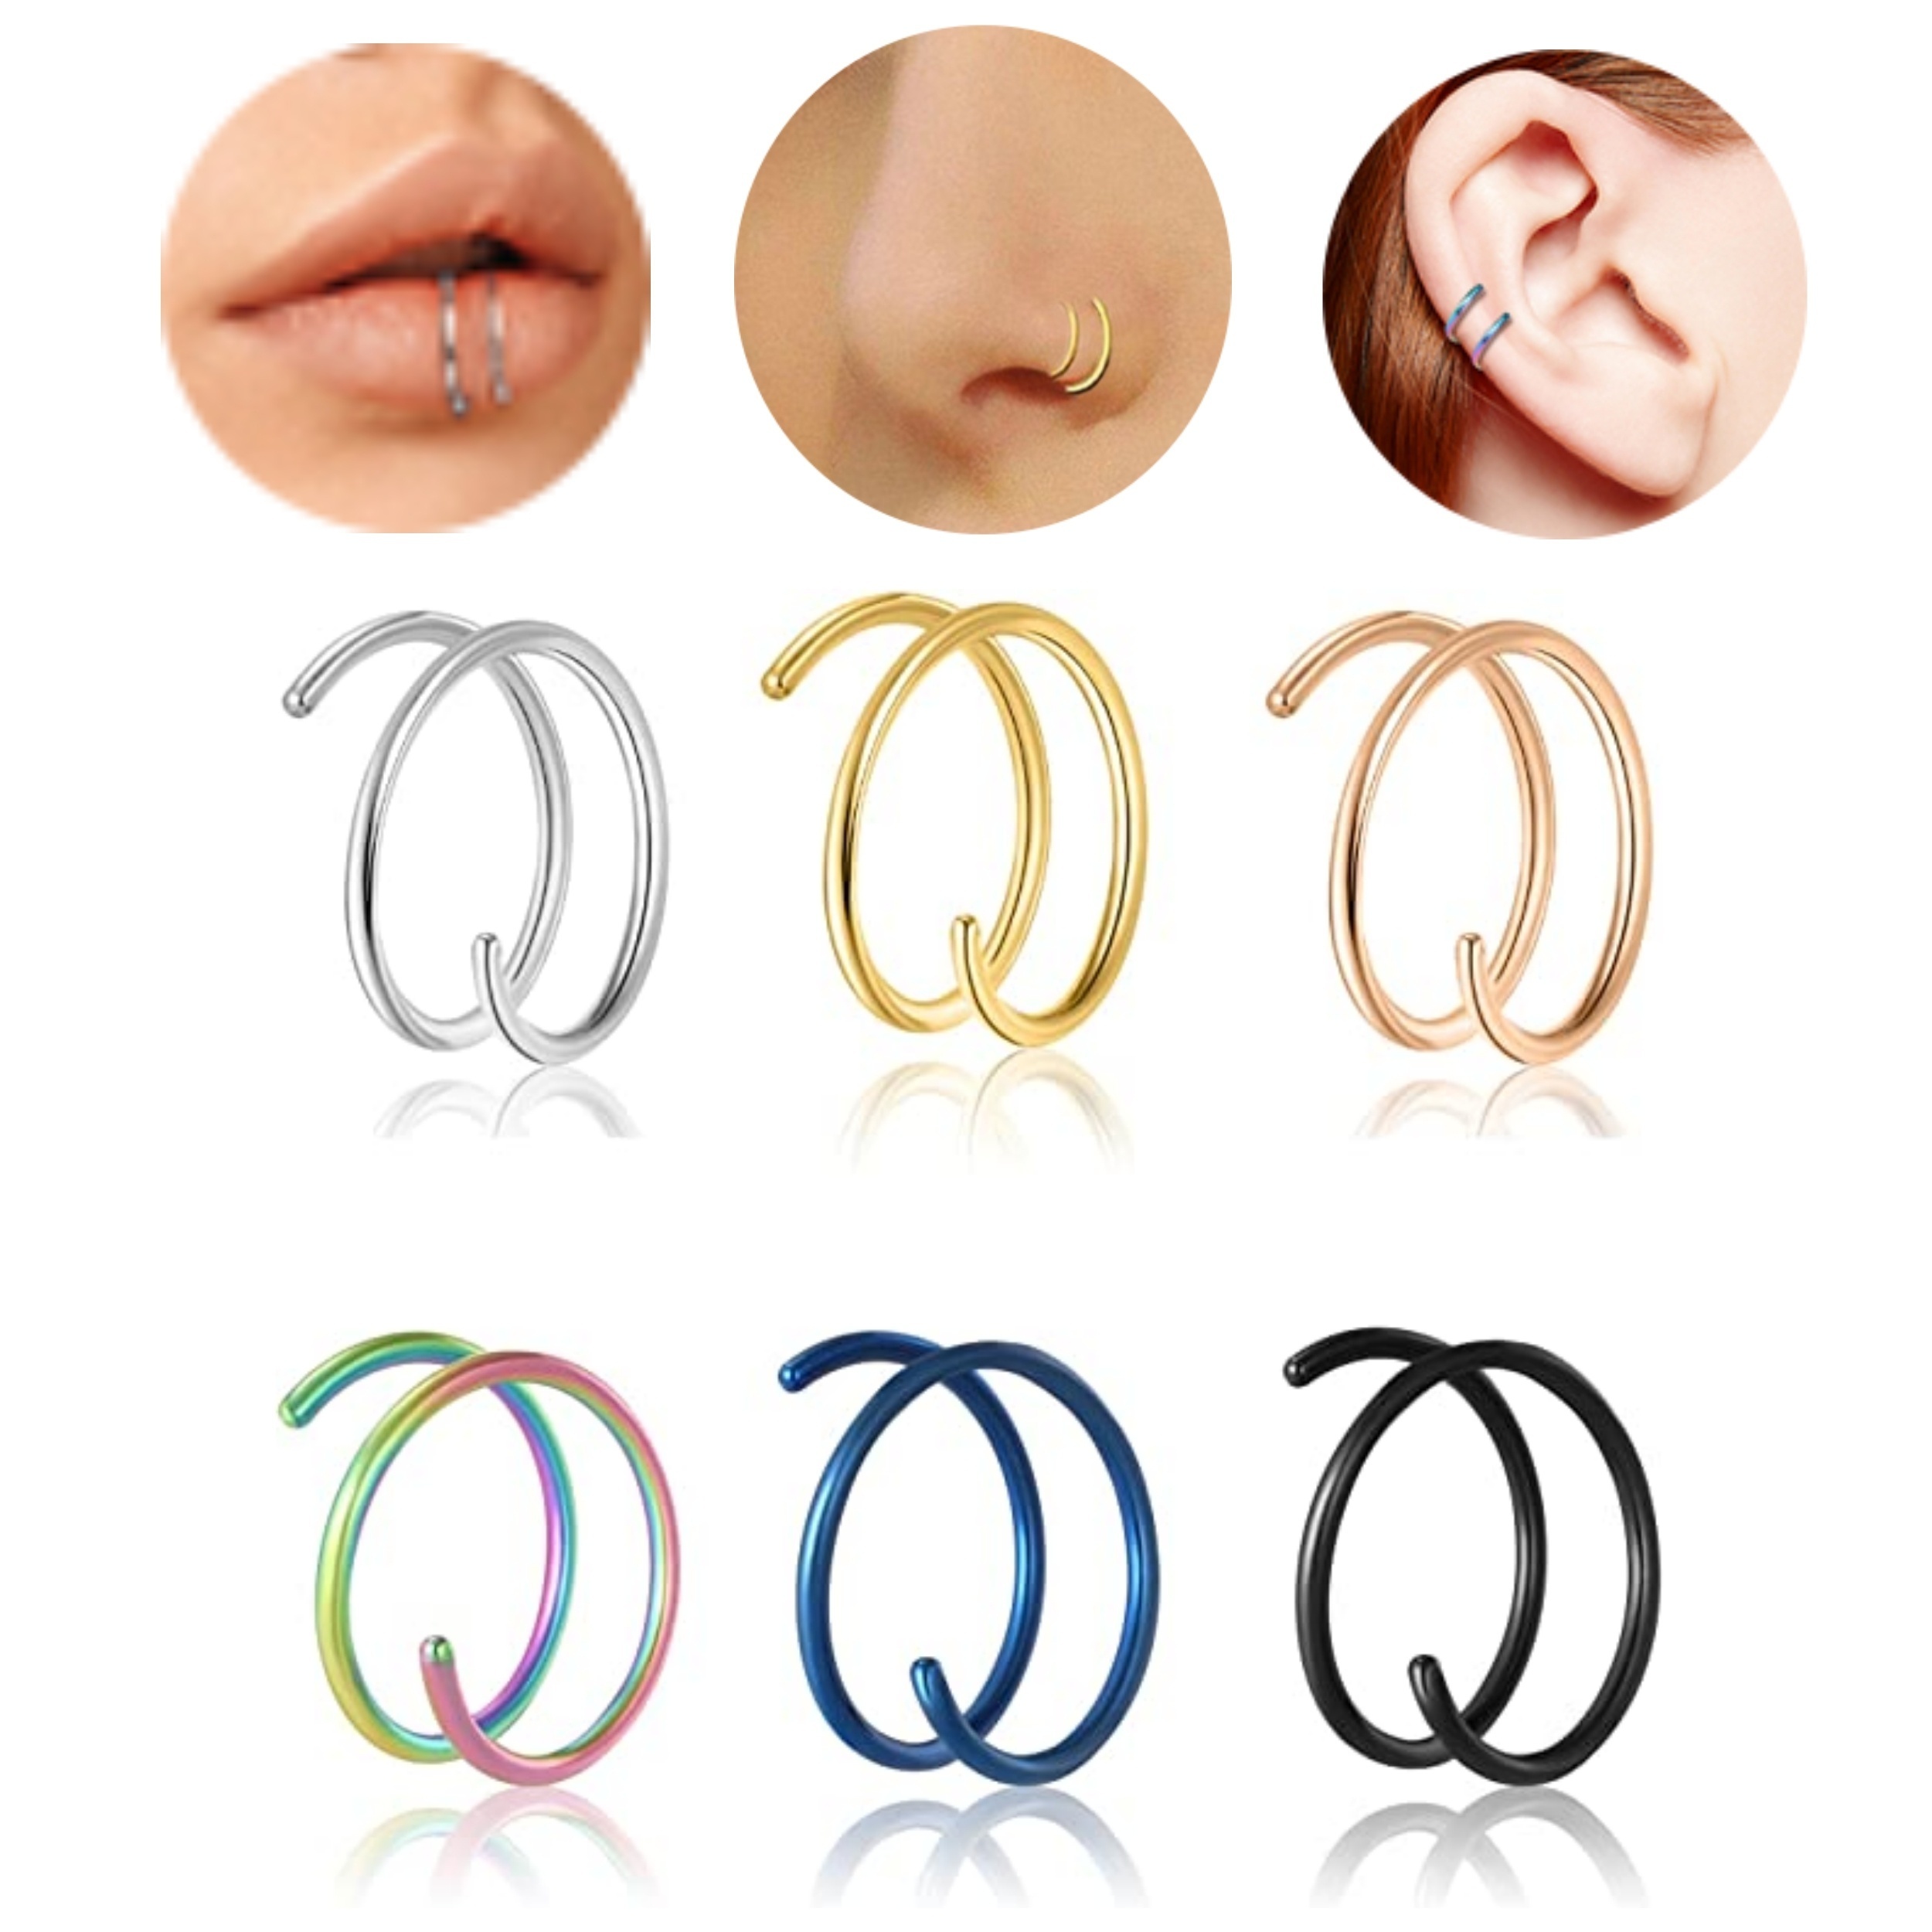 O-Rings vs Lip Rings: What's the Difference?